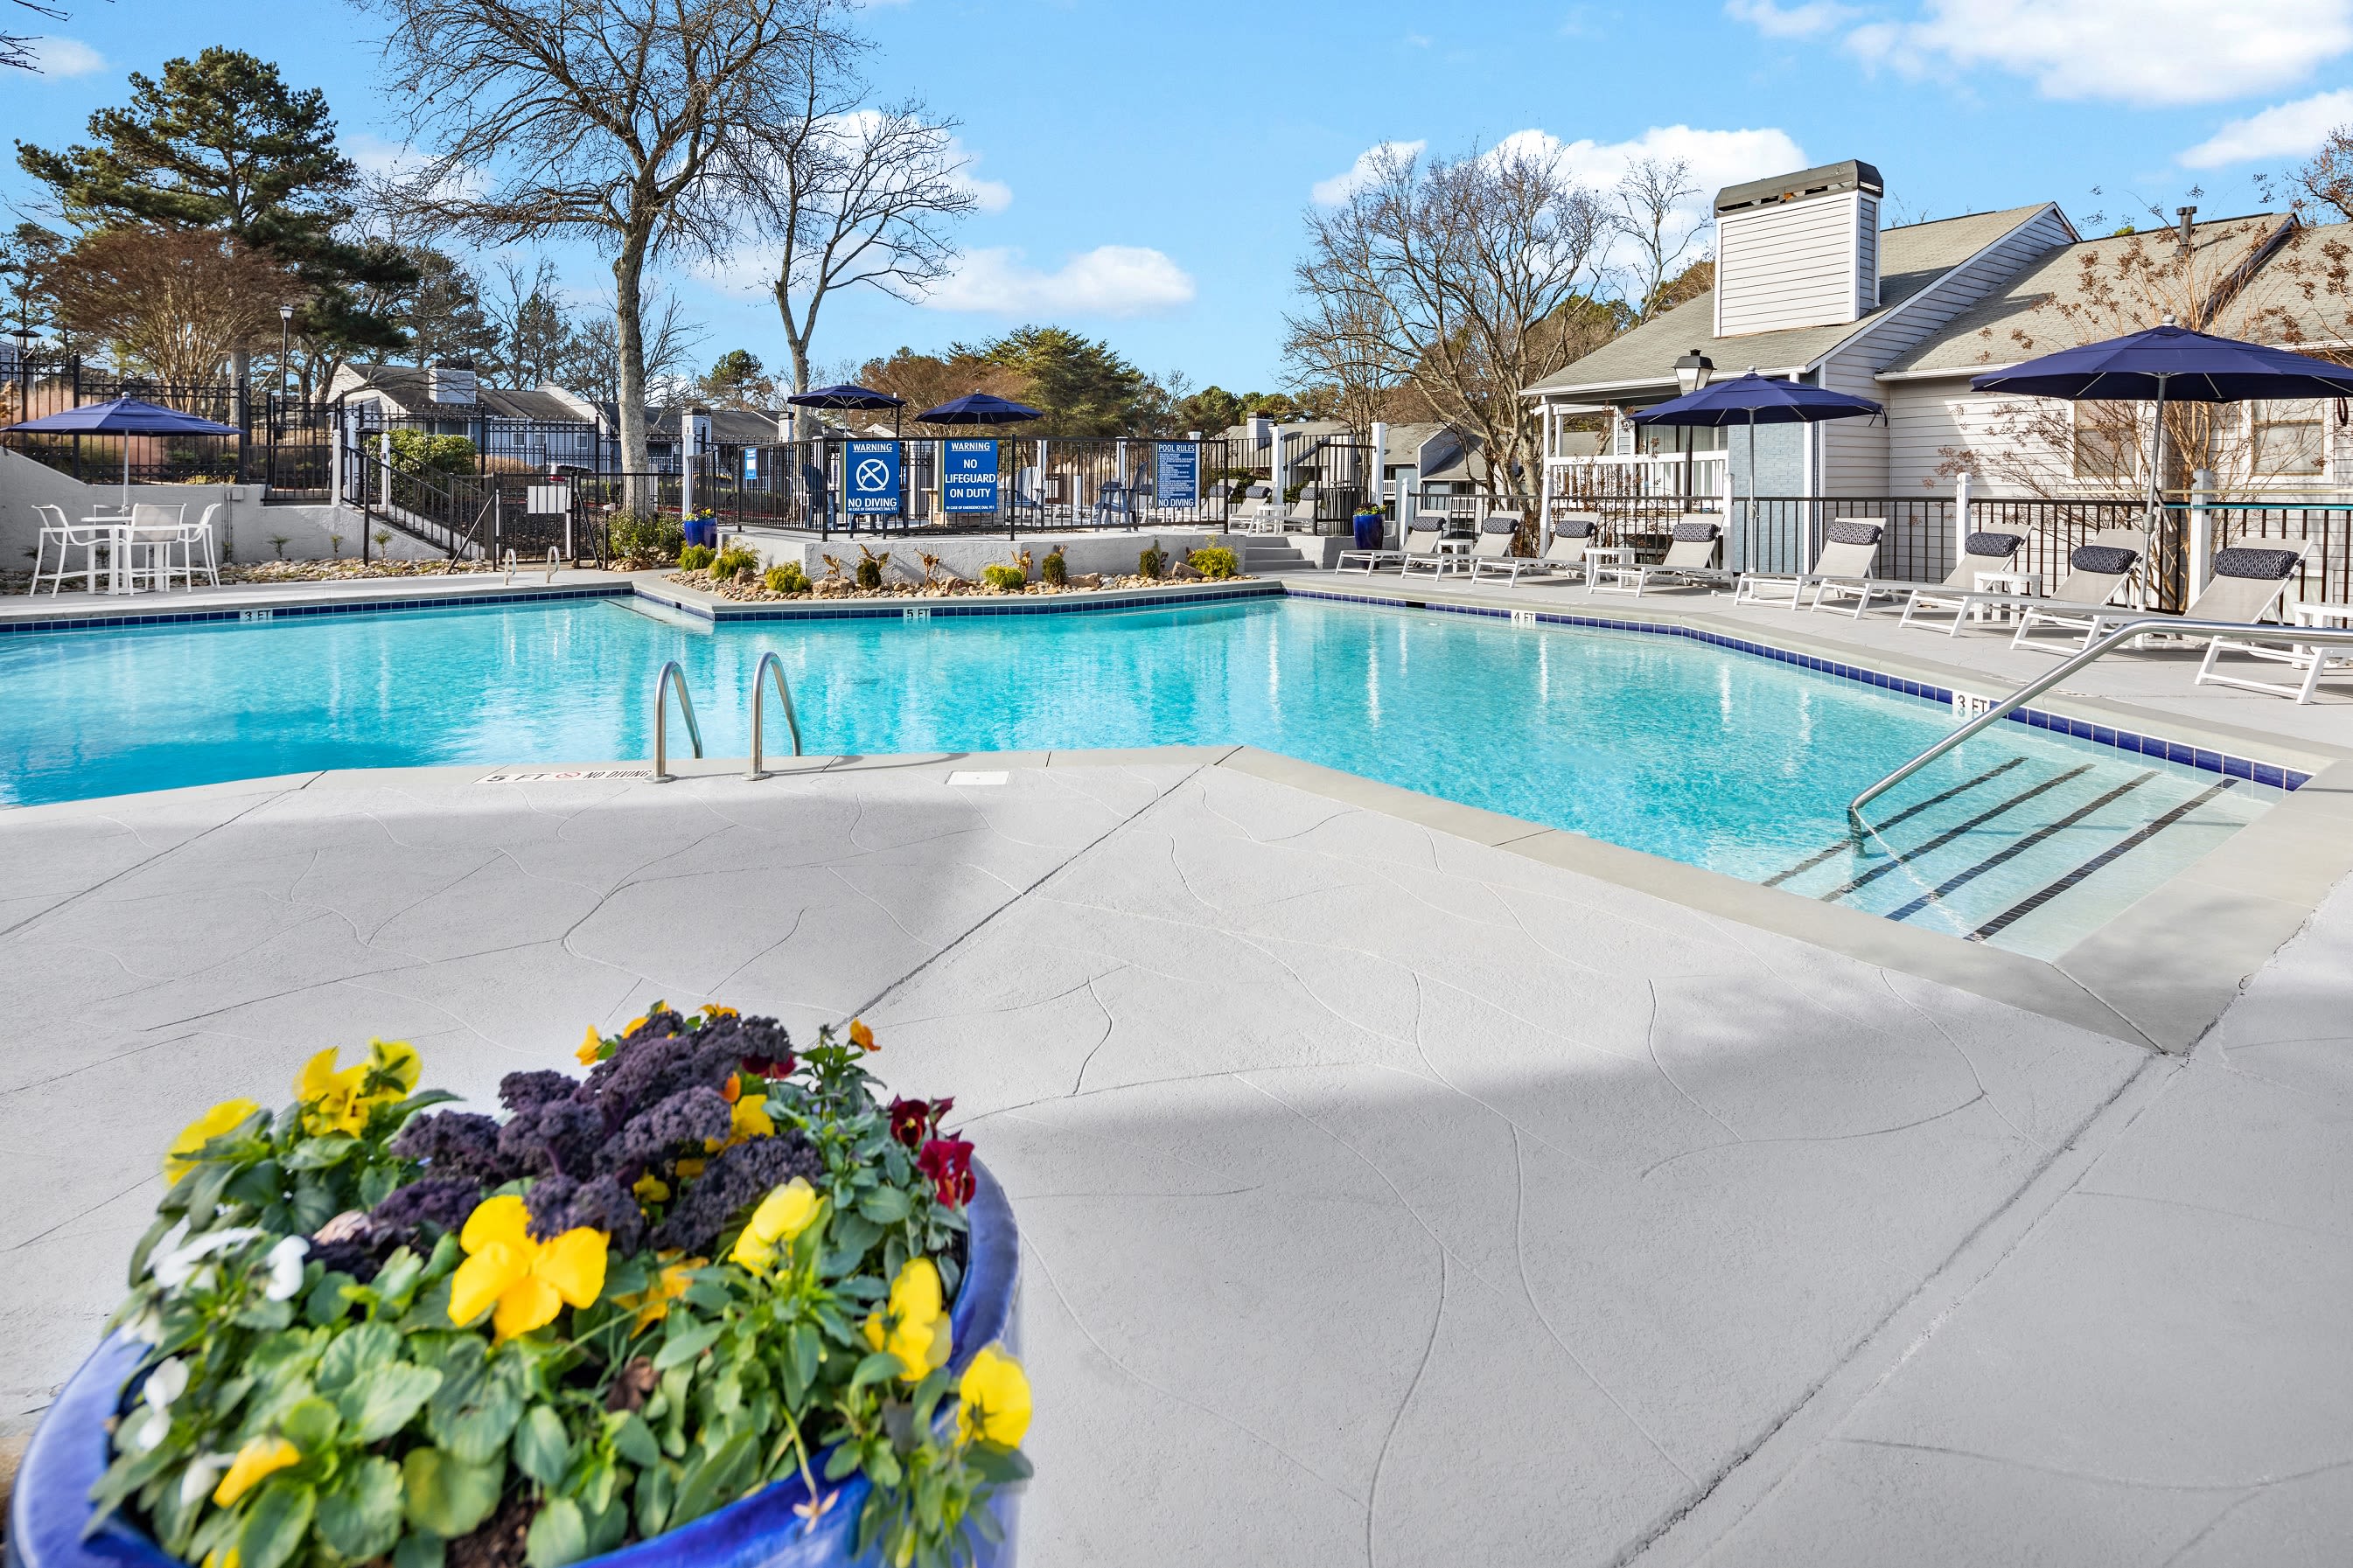 Resort-style swimming pool on a beautiful day at The Everette at East Cobb in Marietta, Georgia